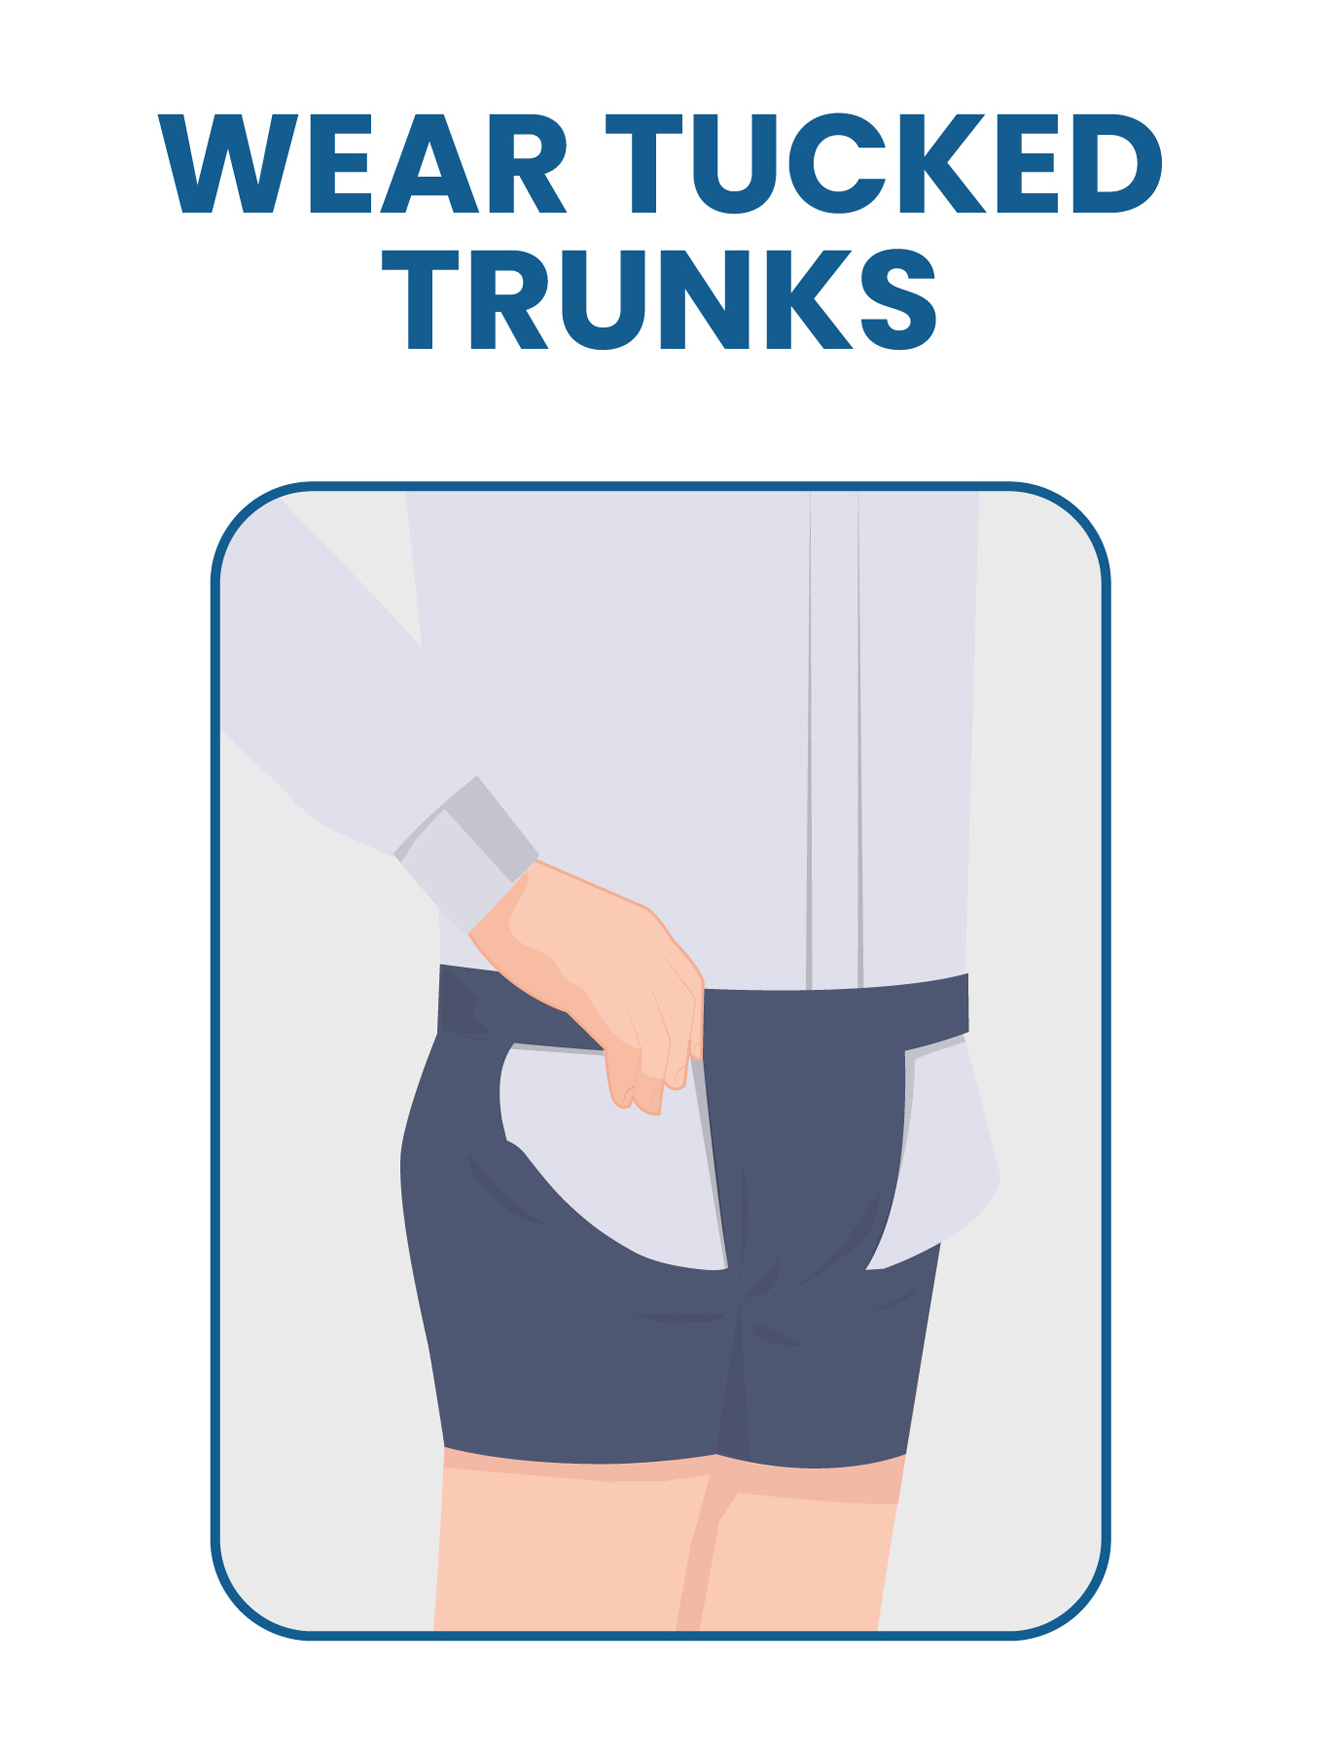 wear tucked trunks to keep shirt tucked in